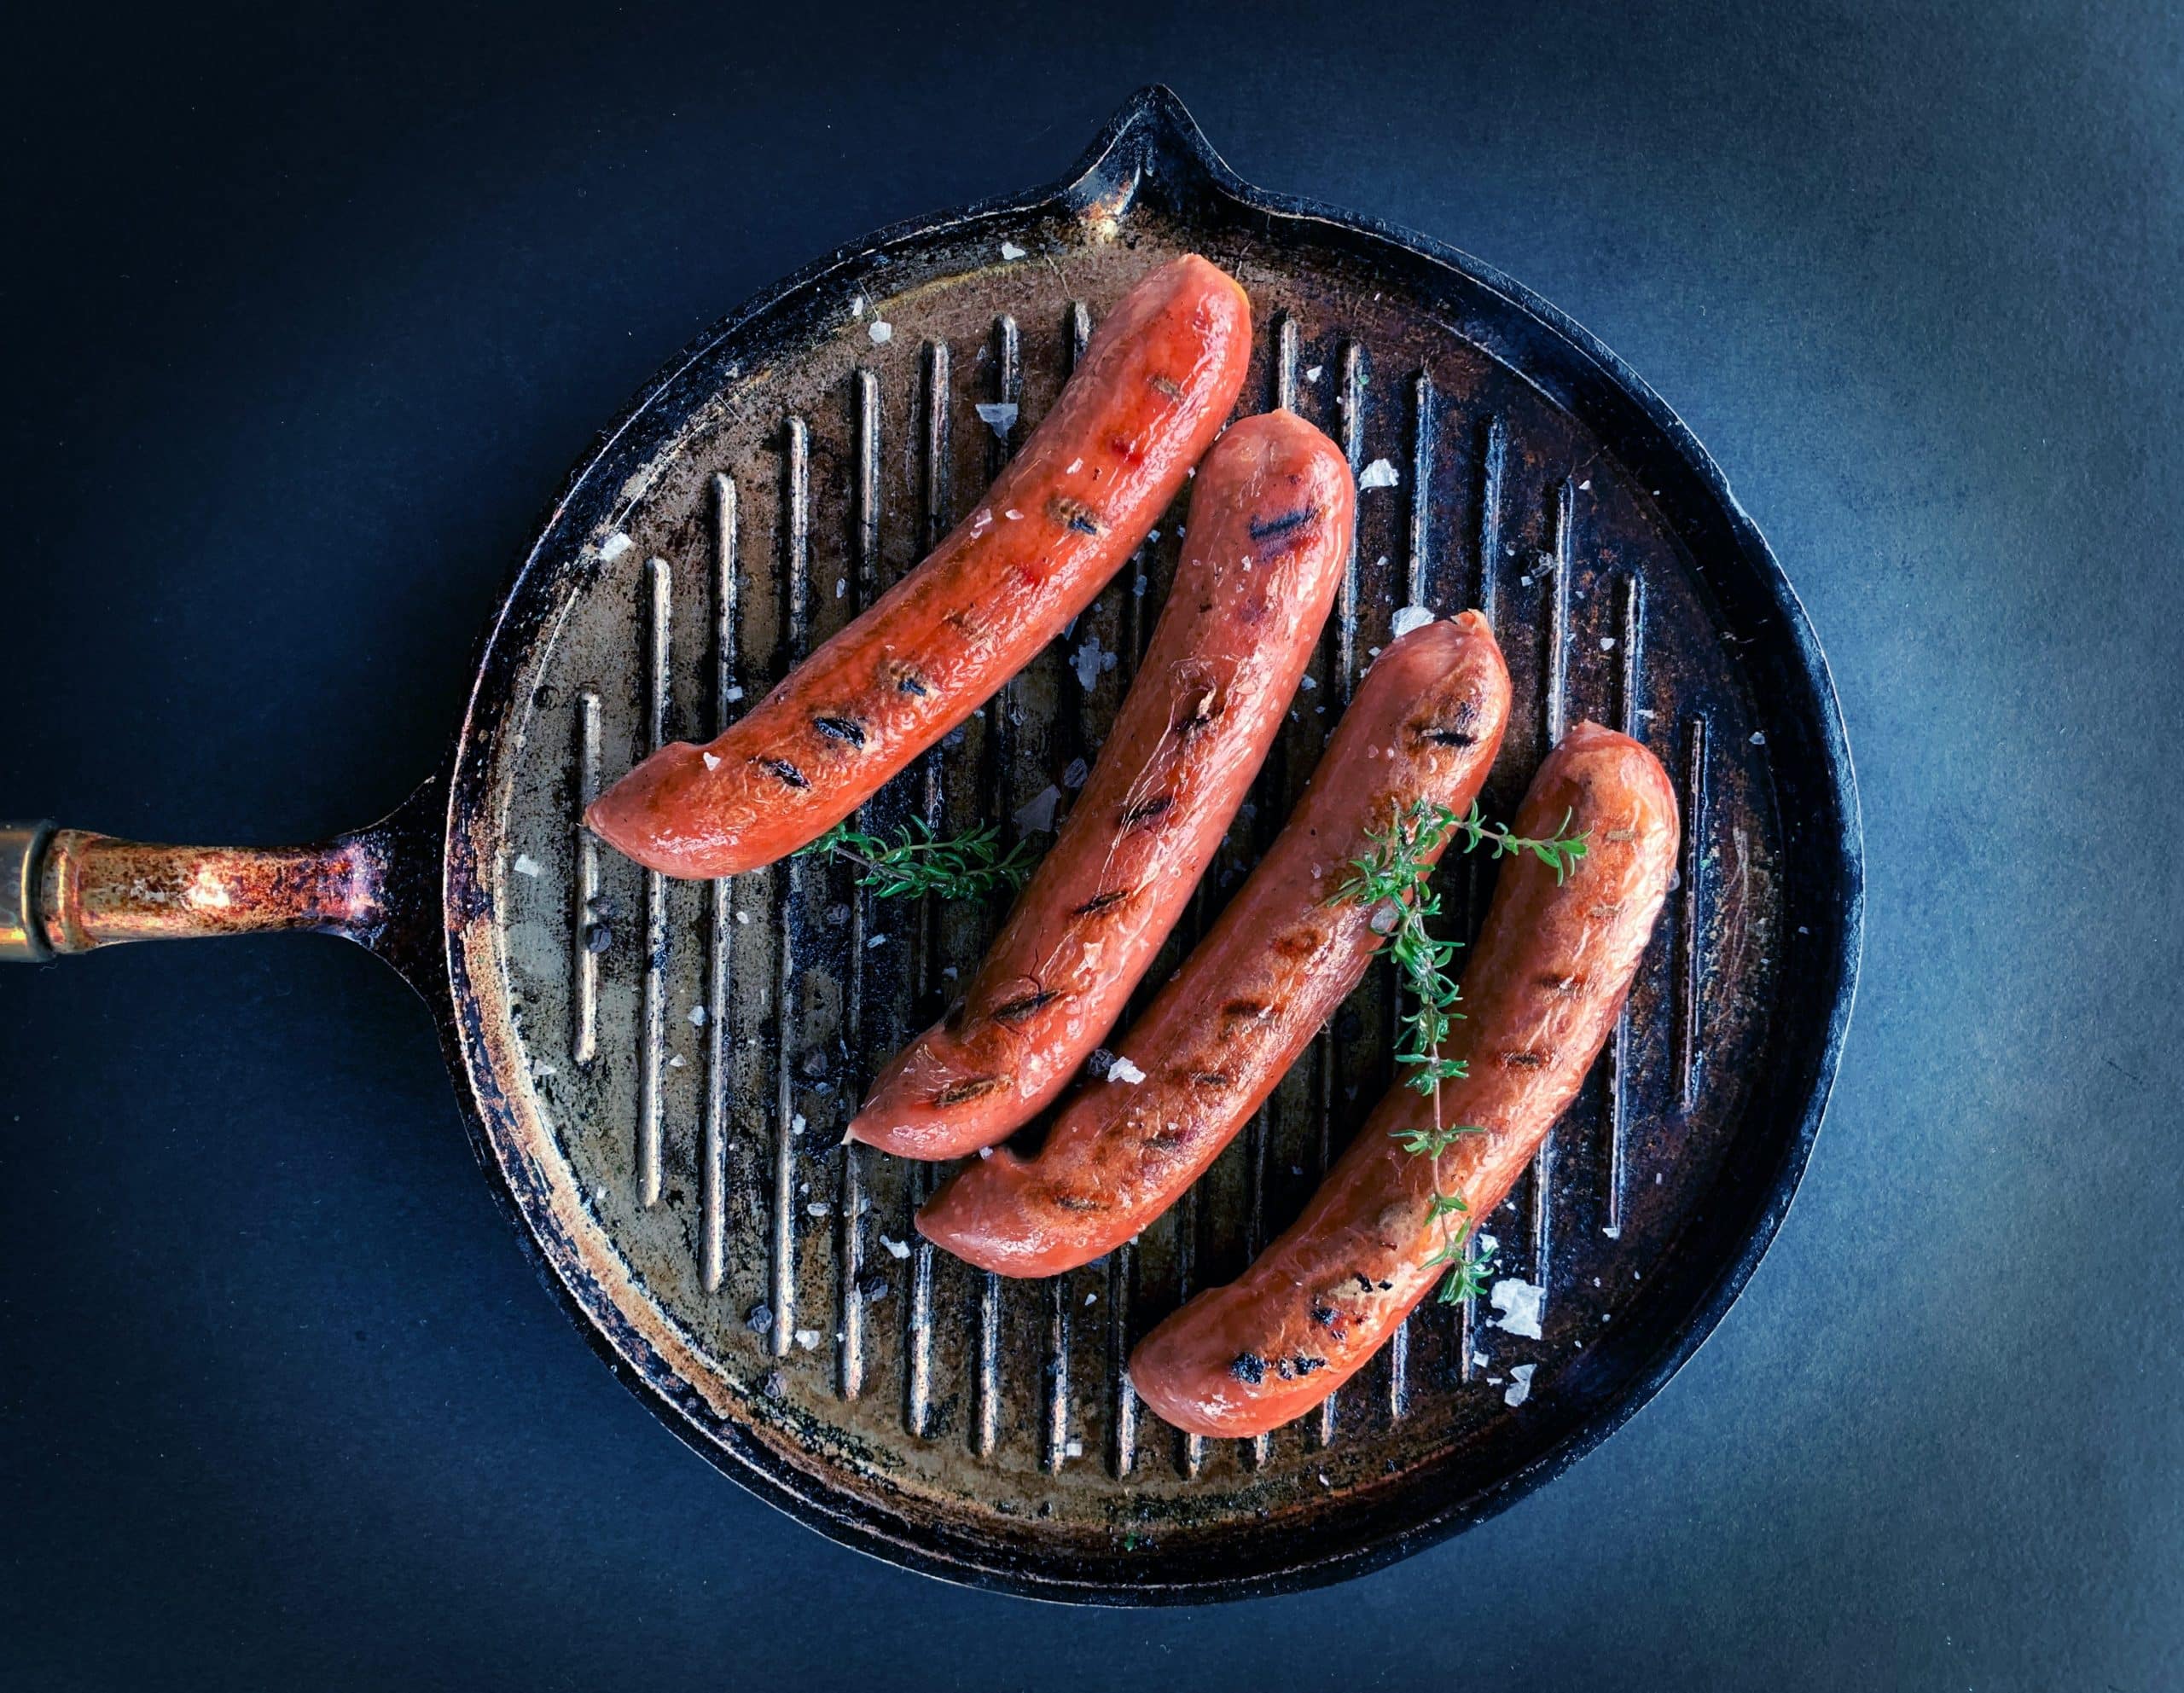 plant-based sausages
